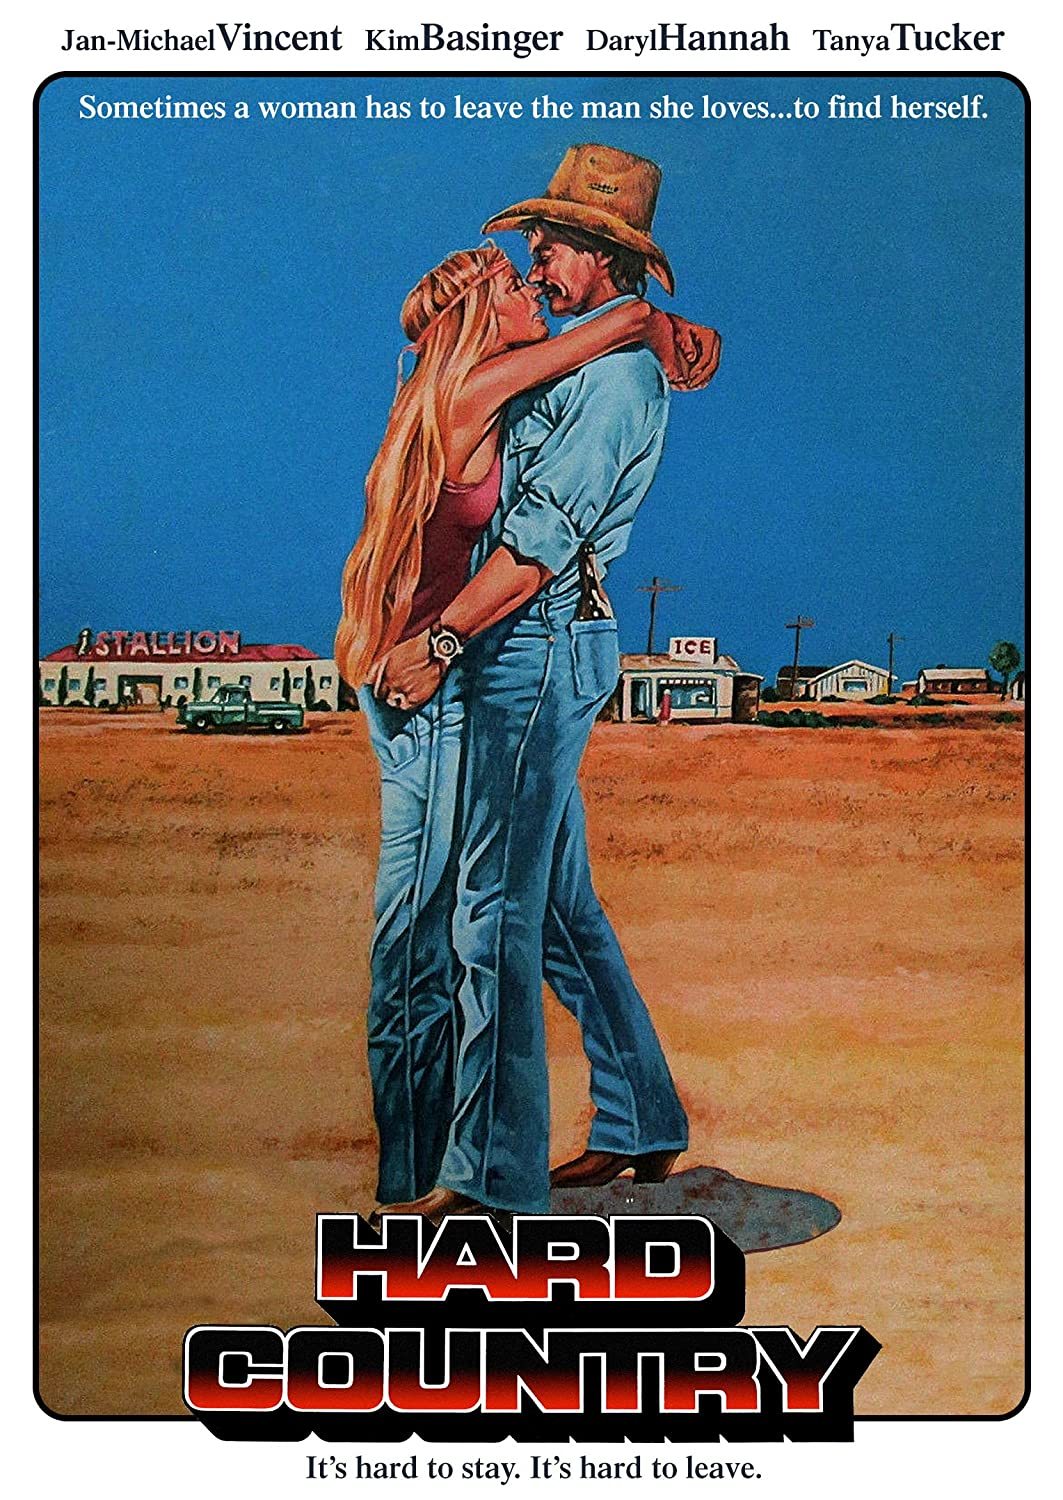 HARD COUNTRY DVD